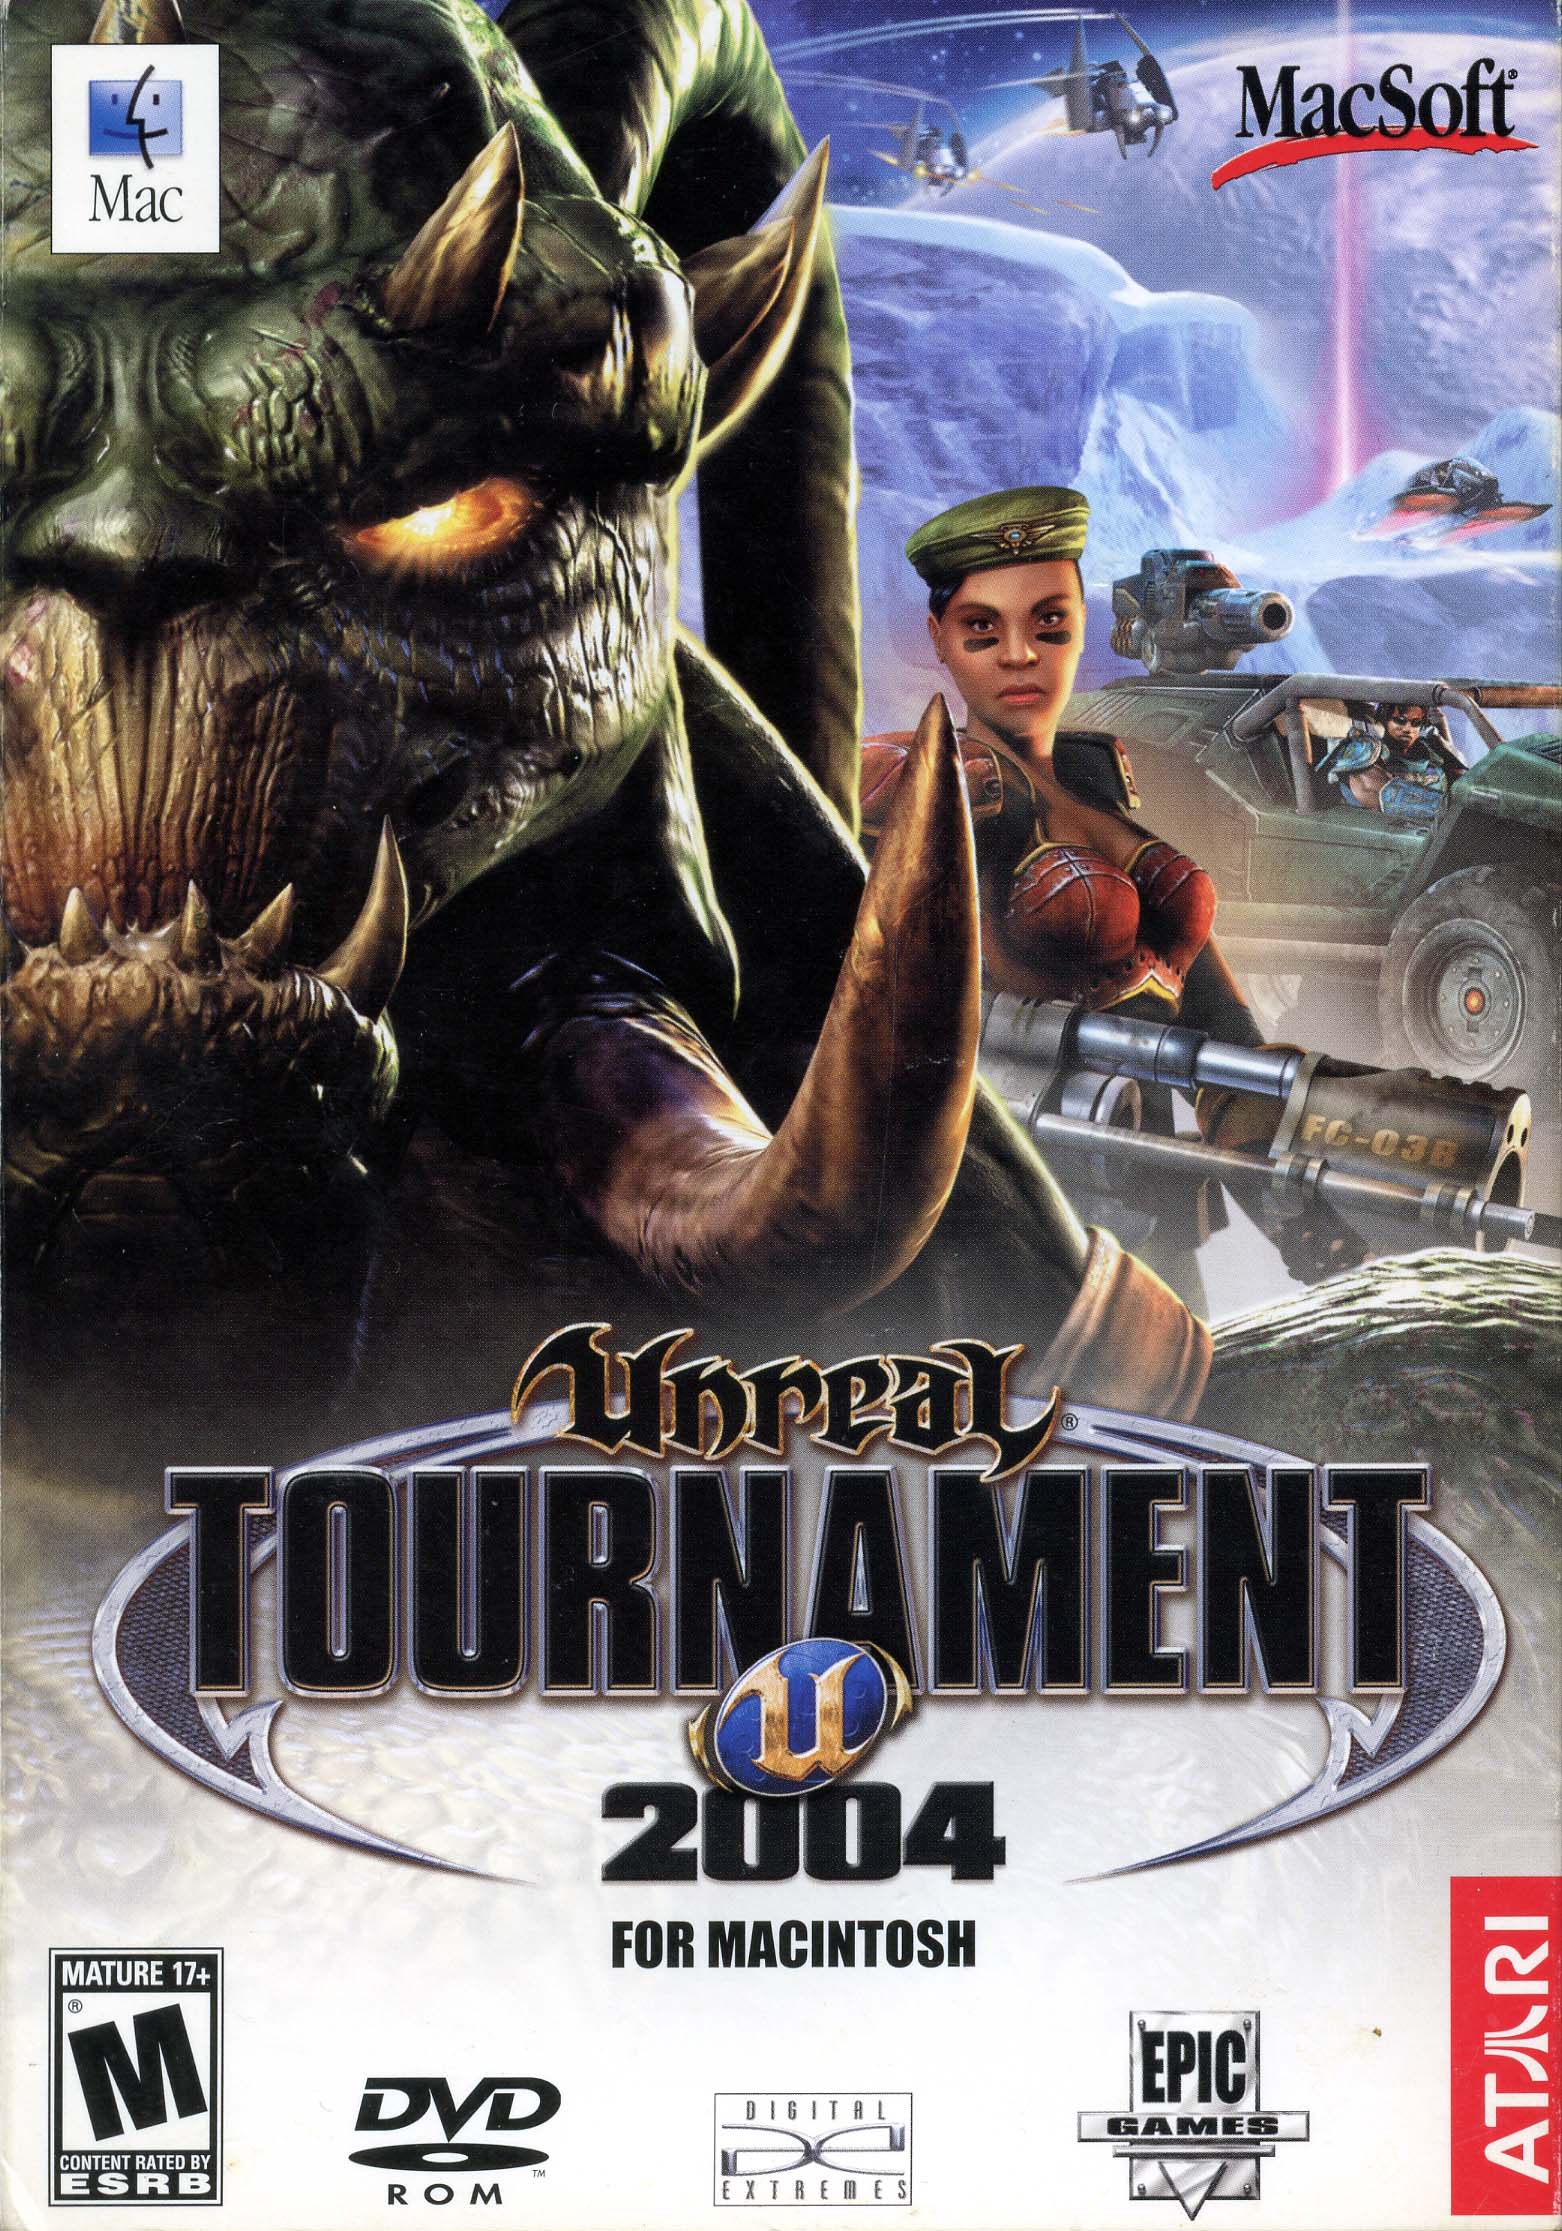 Unreal tournament 2004 for mac os xp